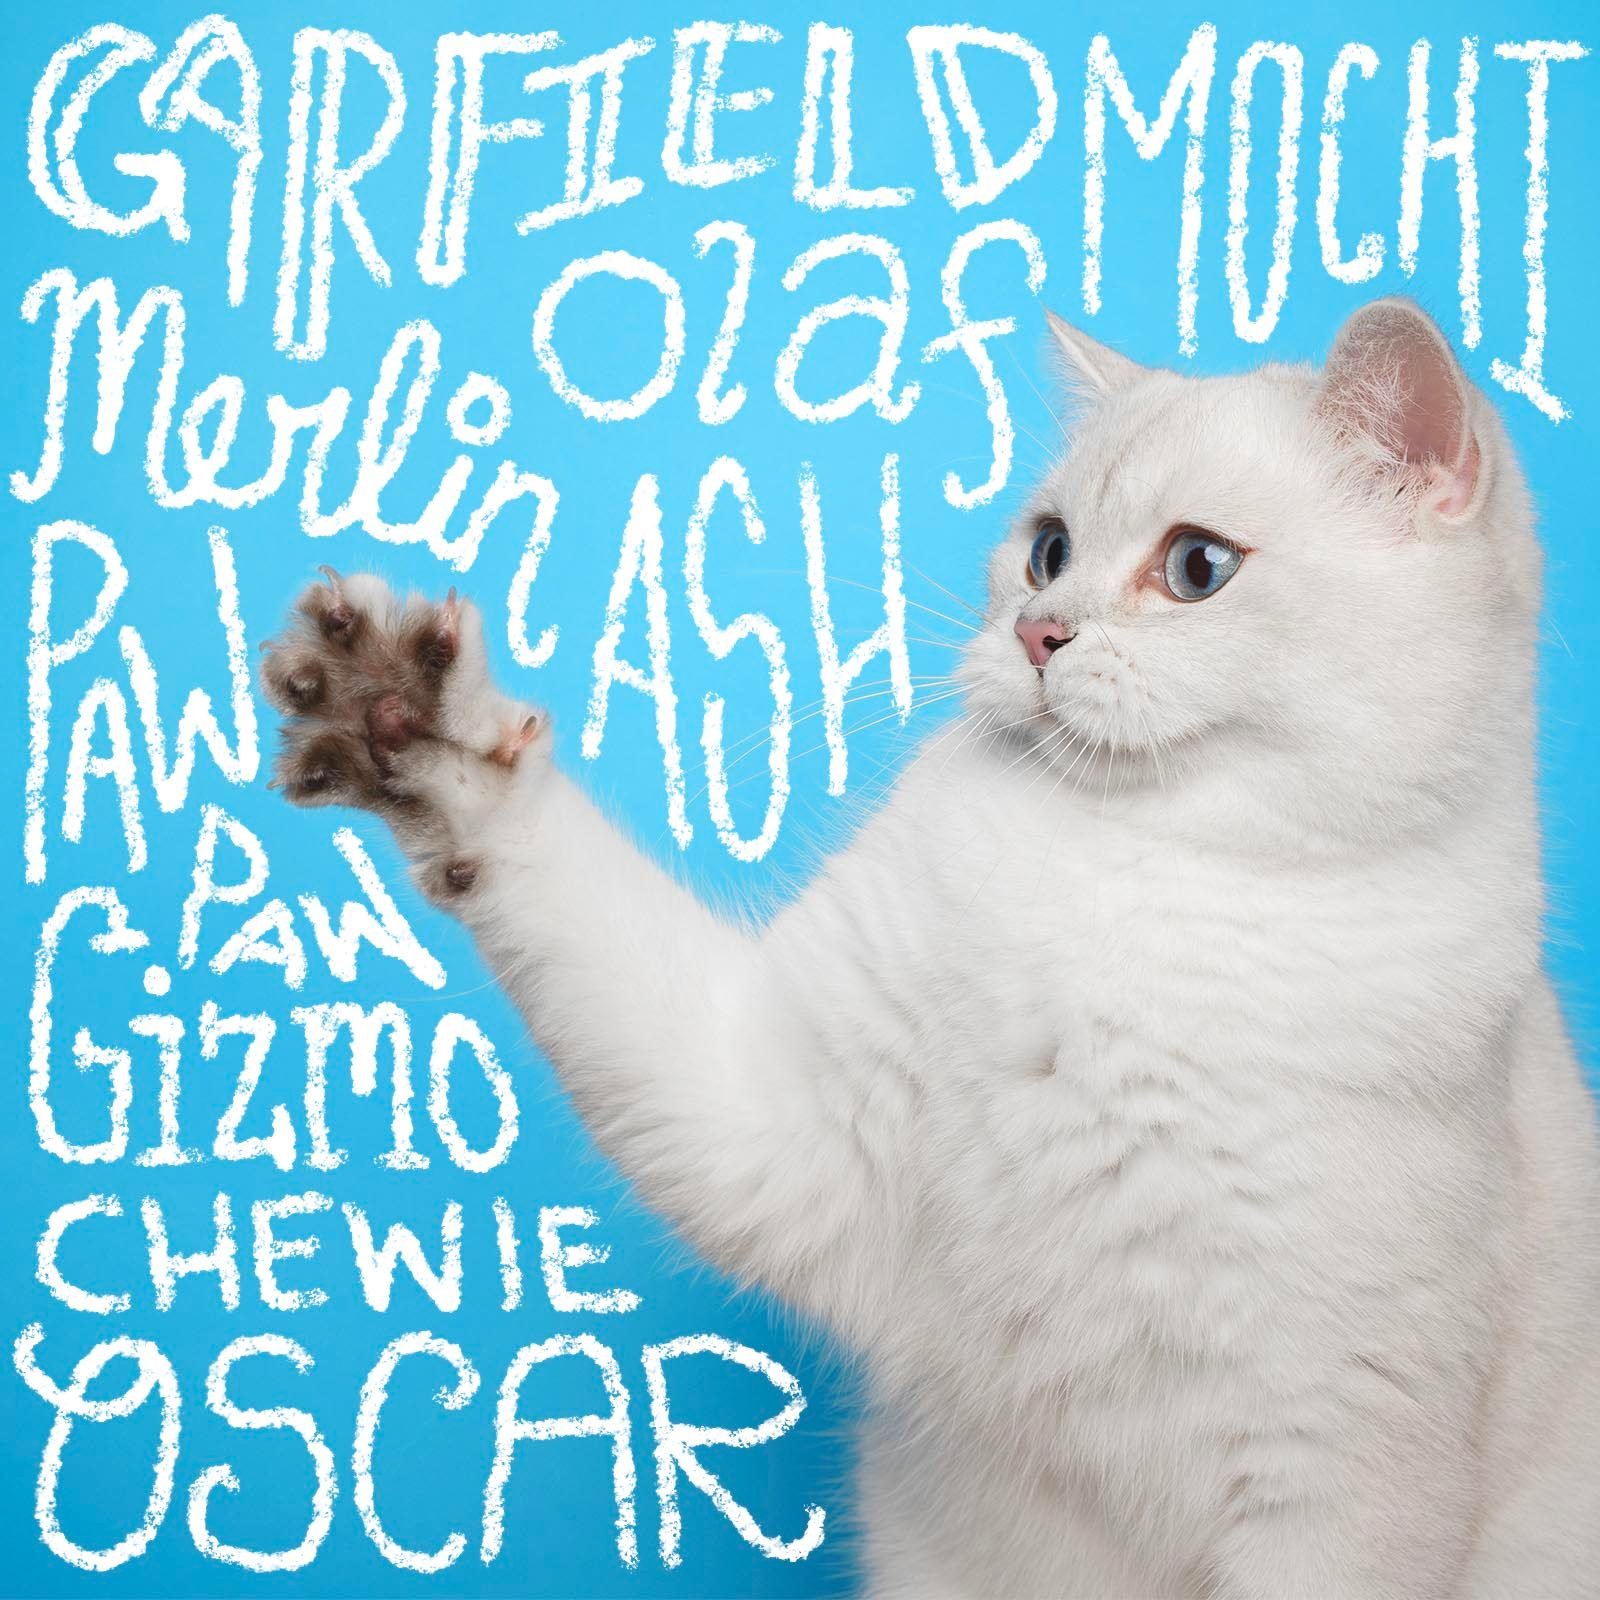 Boy cat names handwritten on a photo of a cat on a blue background